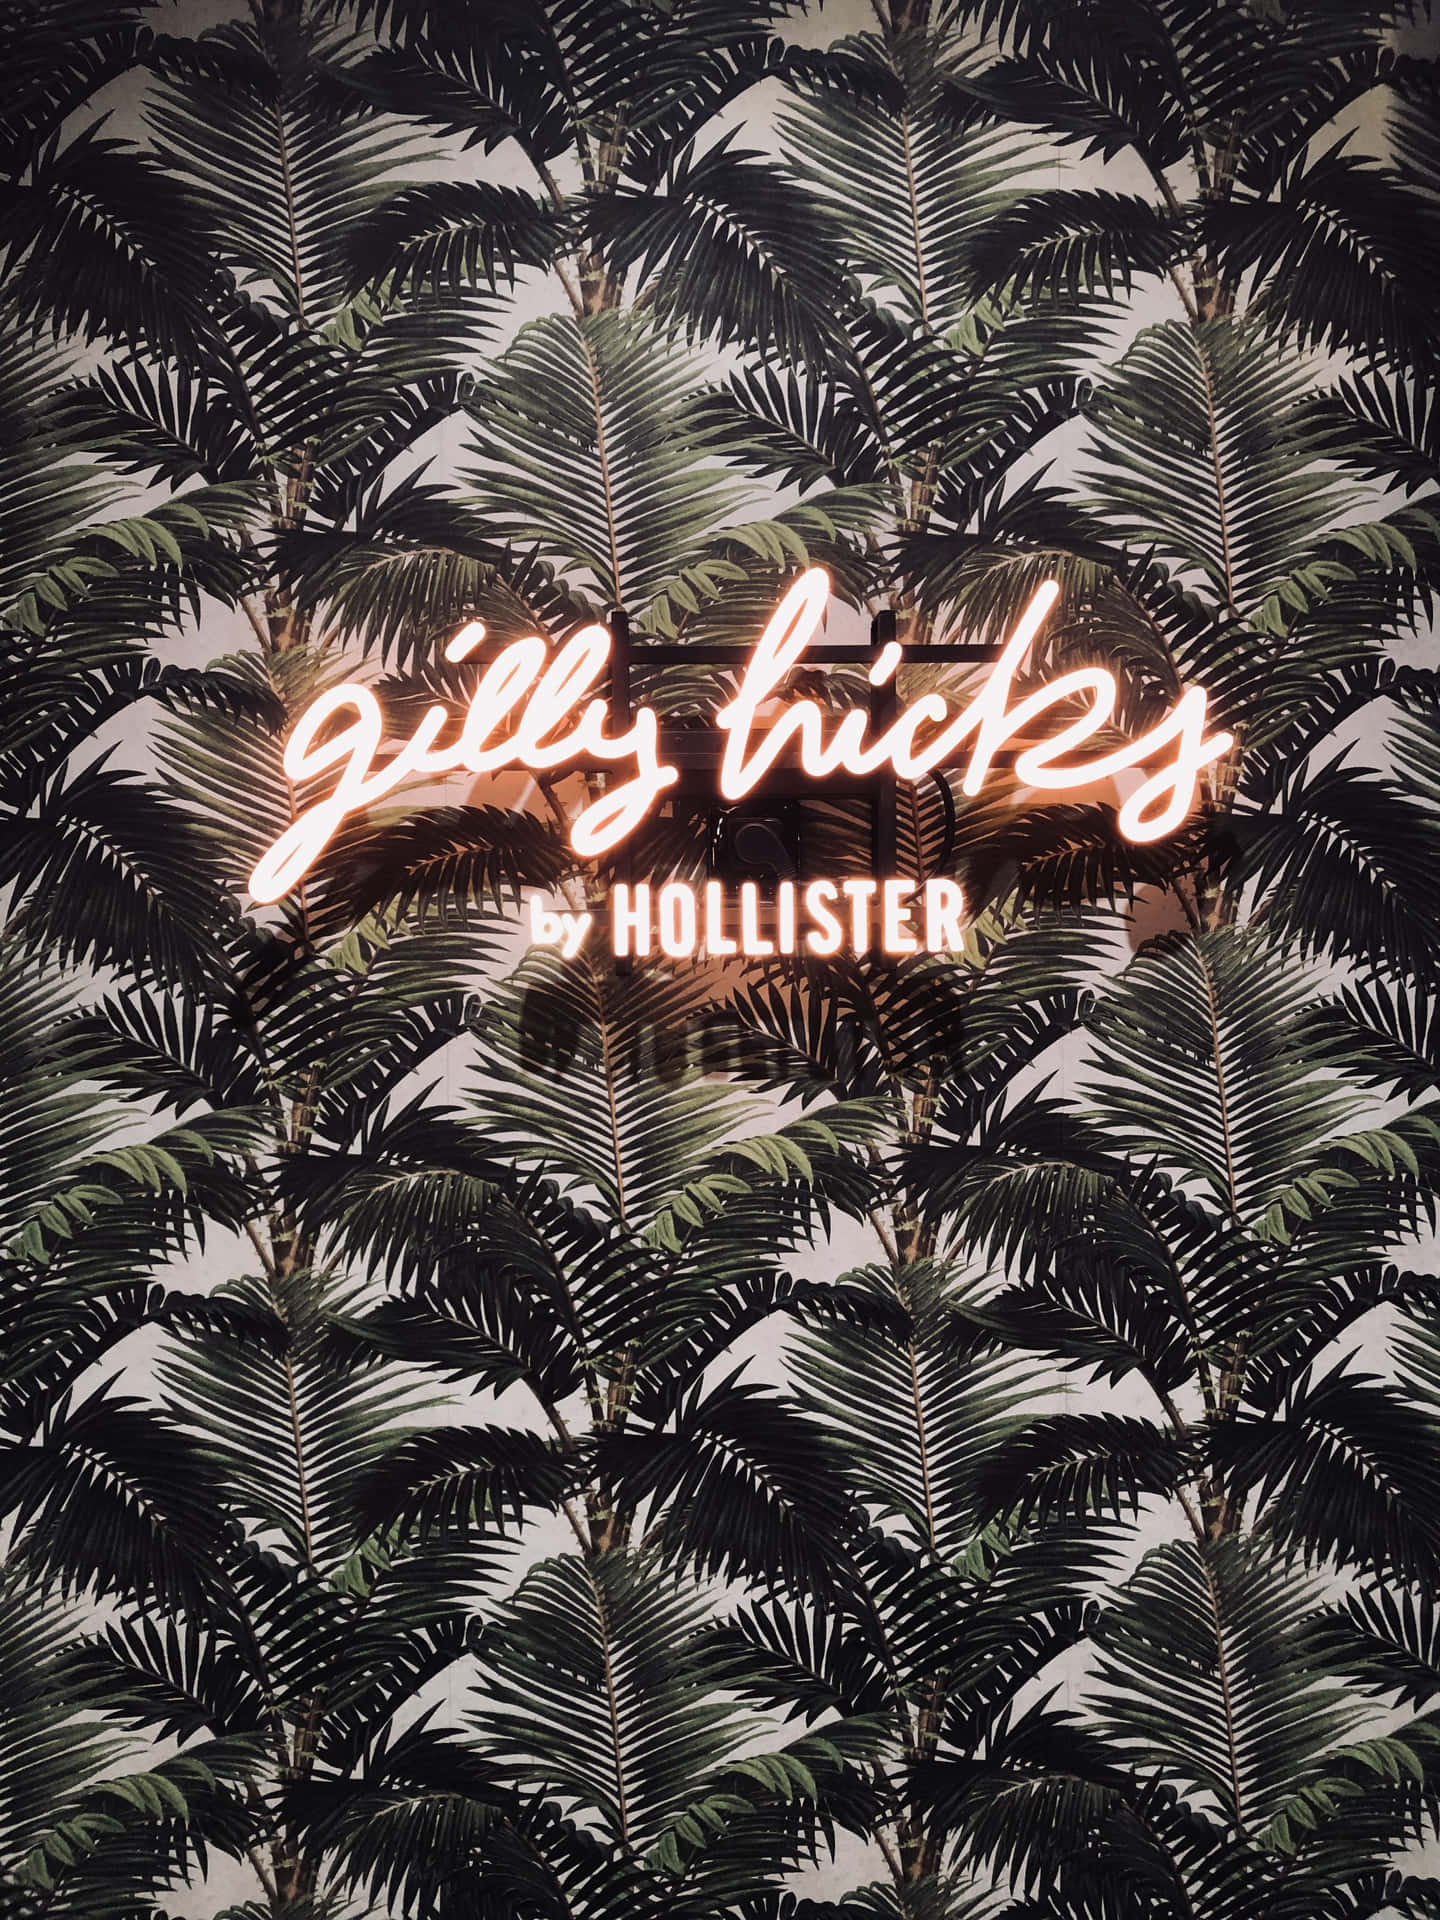 A Neon Sign That Says Hollister